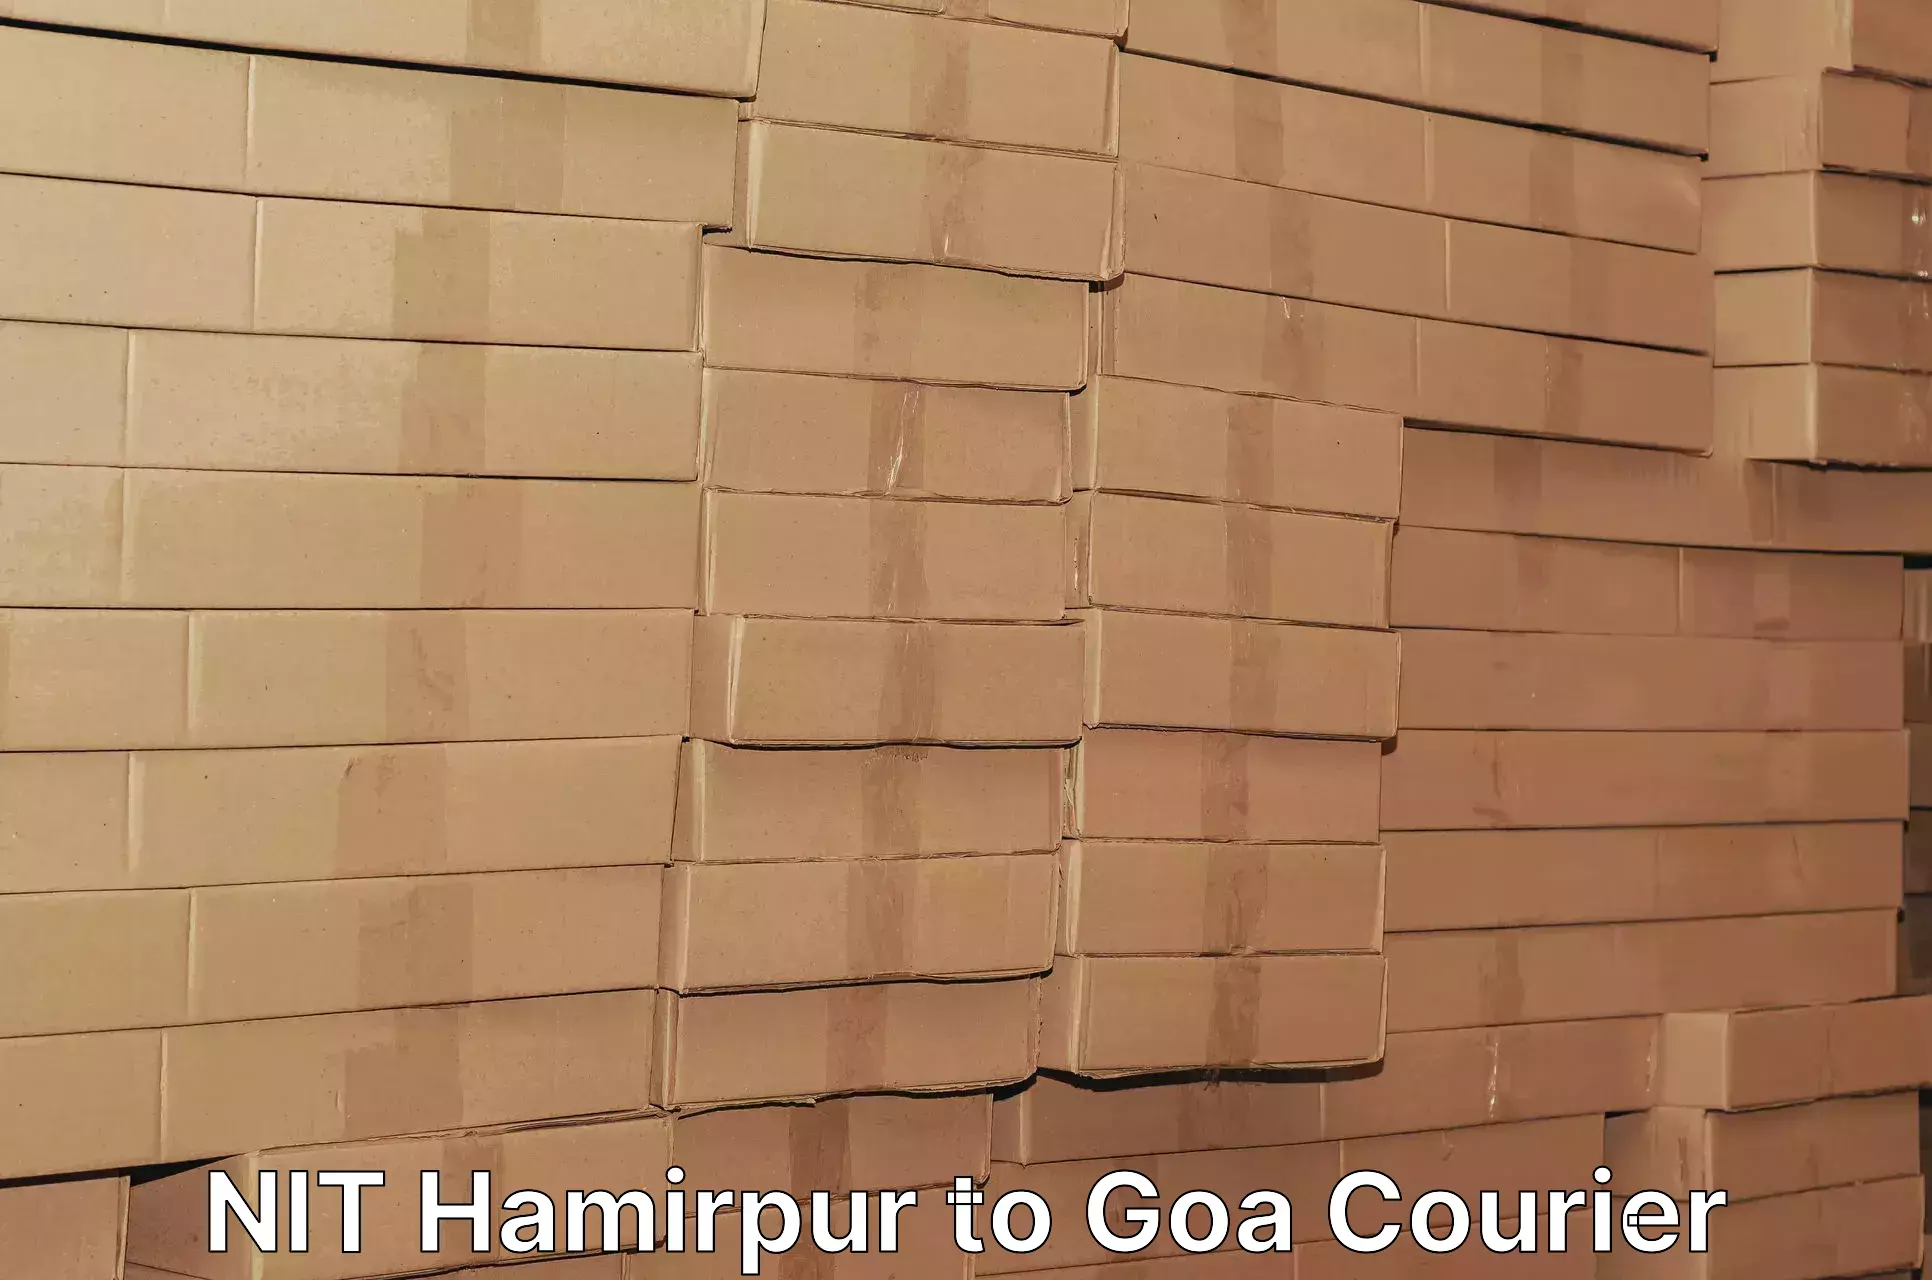 Courier service booking NIT Hamirpur to Panaji